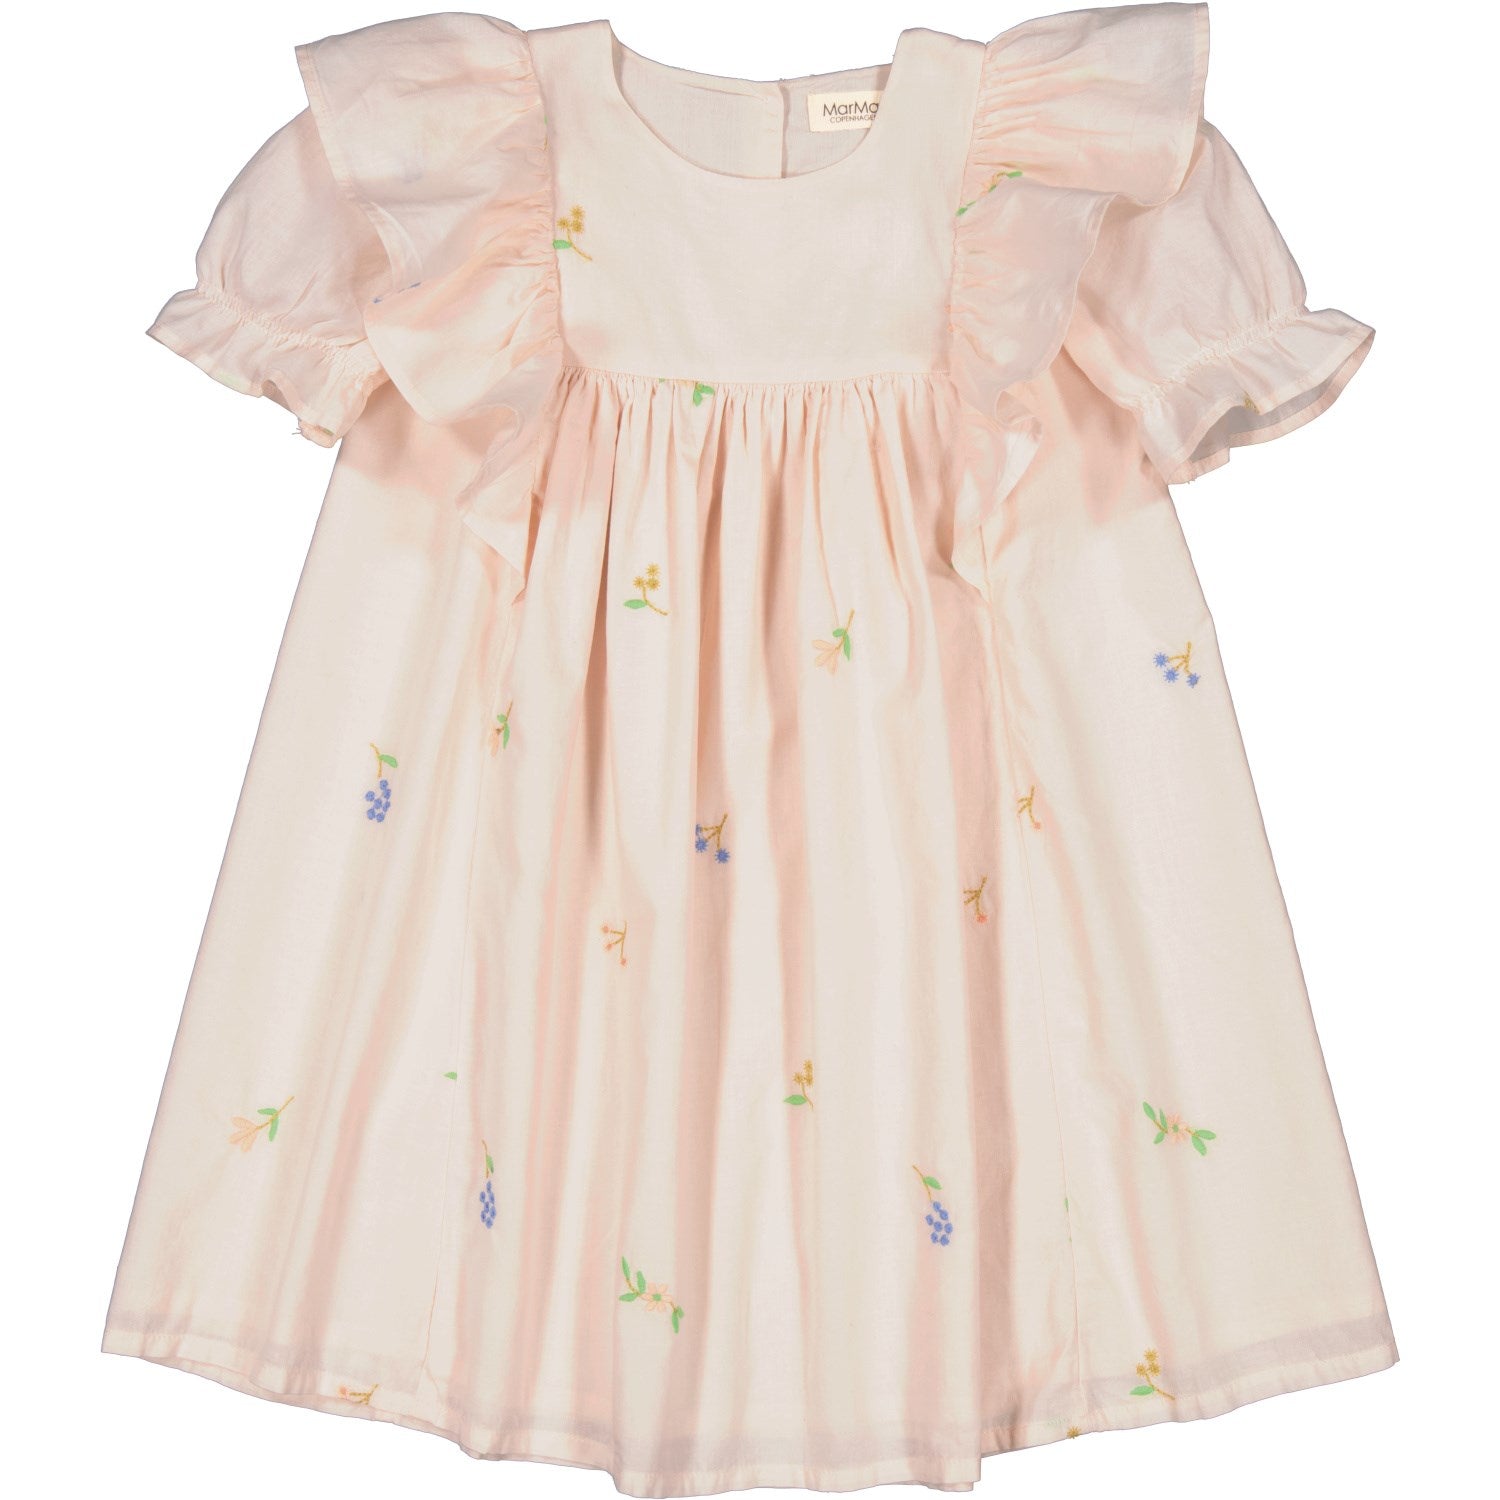 MarMar Cotton Embroidery Spring Embroidery Daria SS Dress